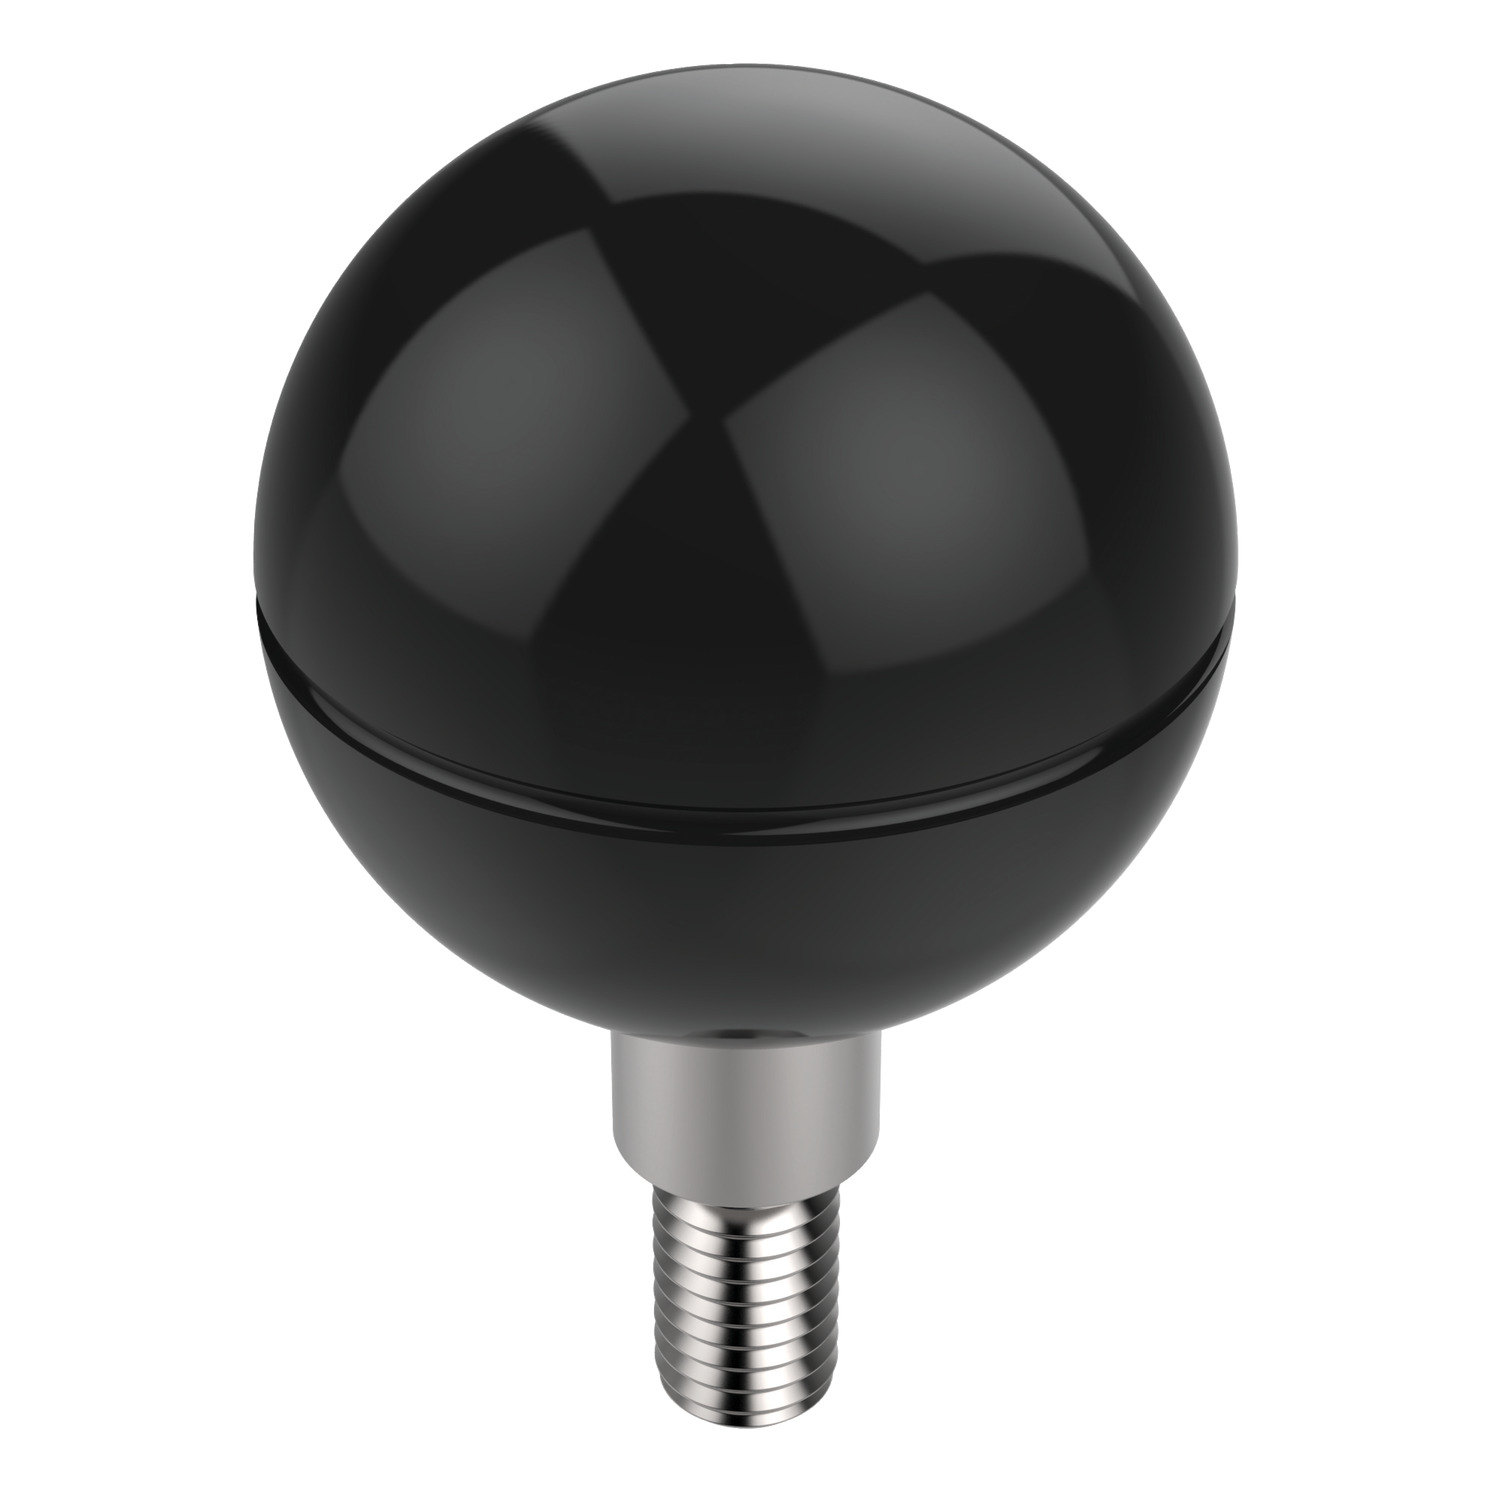 Product 73020, Revolving Ball Knobs  / 